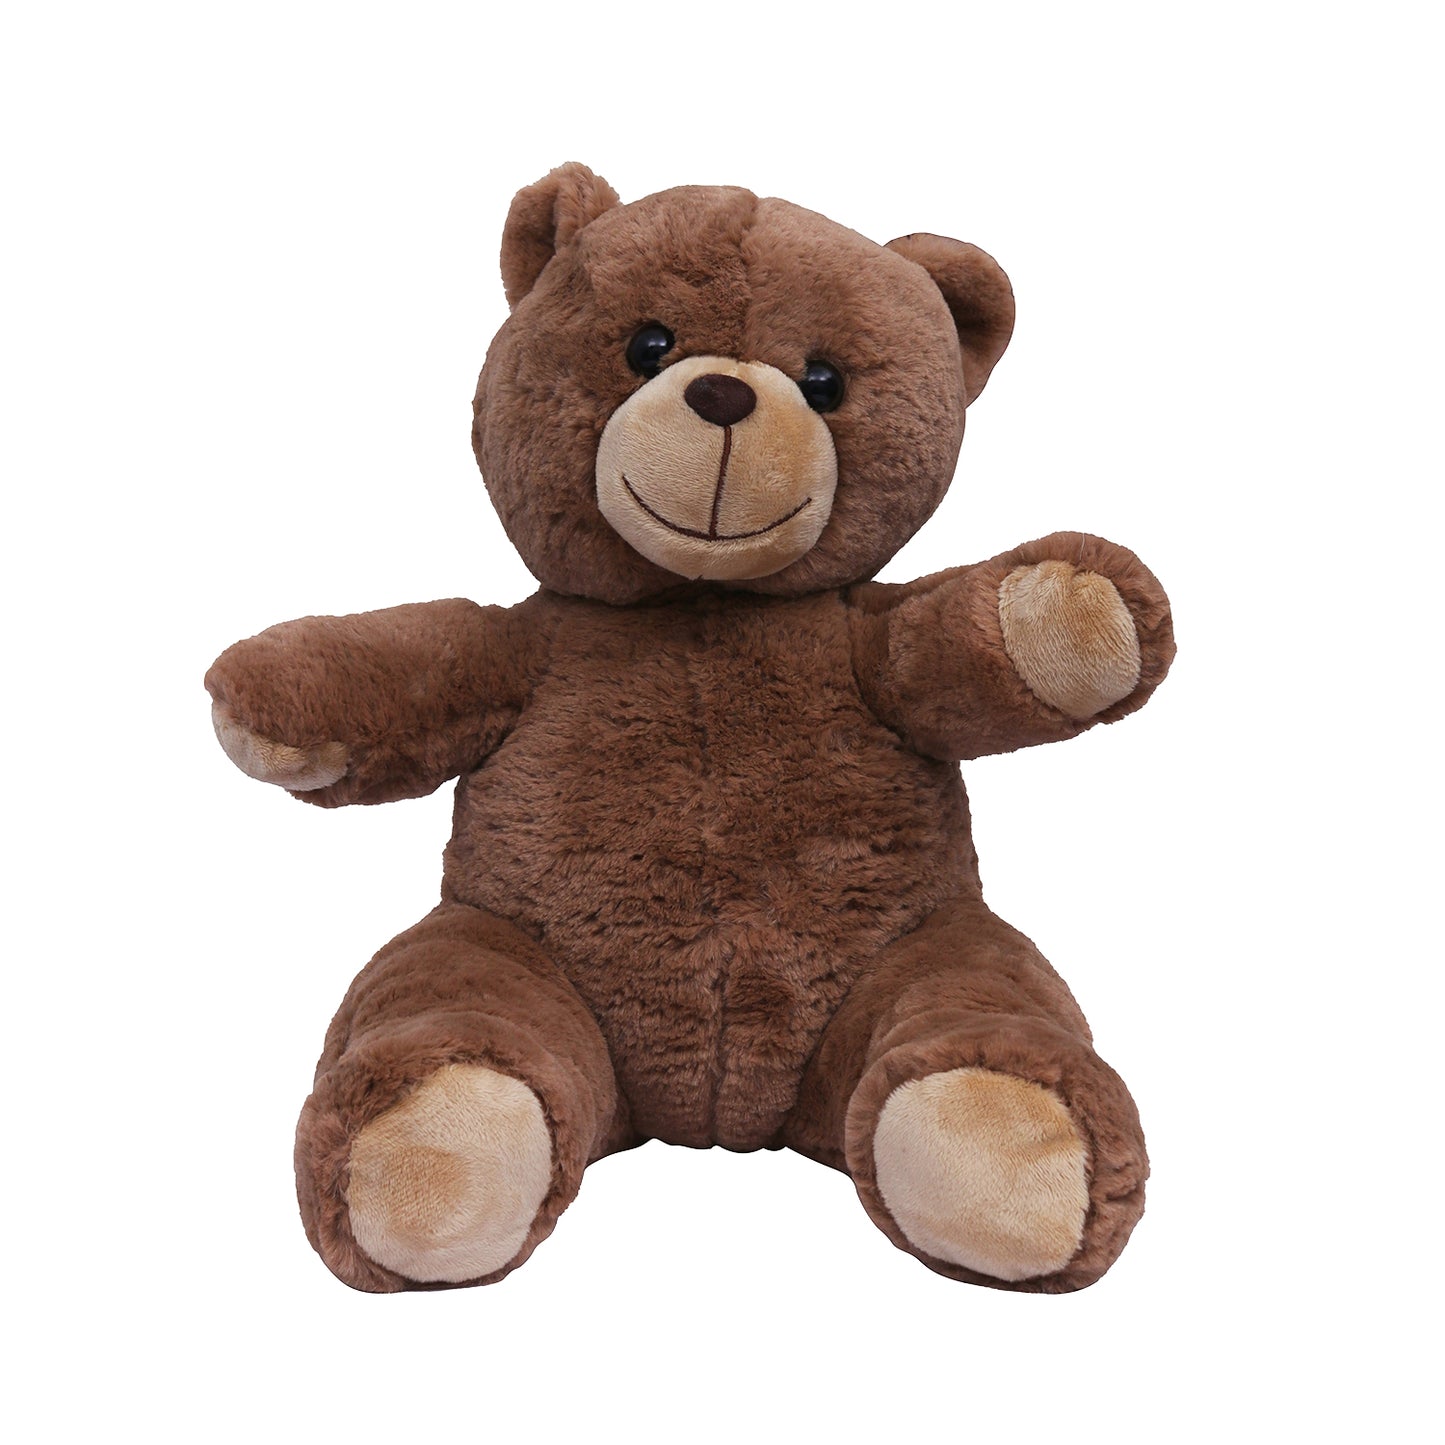 Toyroom-DIY Teddy Bear-Make Your Own Stuff Teddy ( Includes stuffing, birth certificate and a heart)